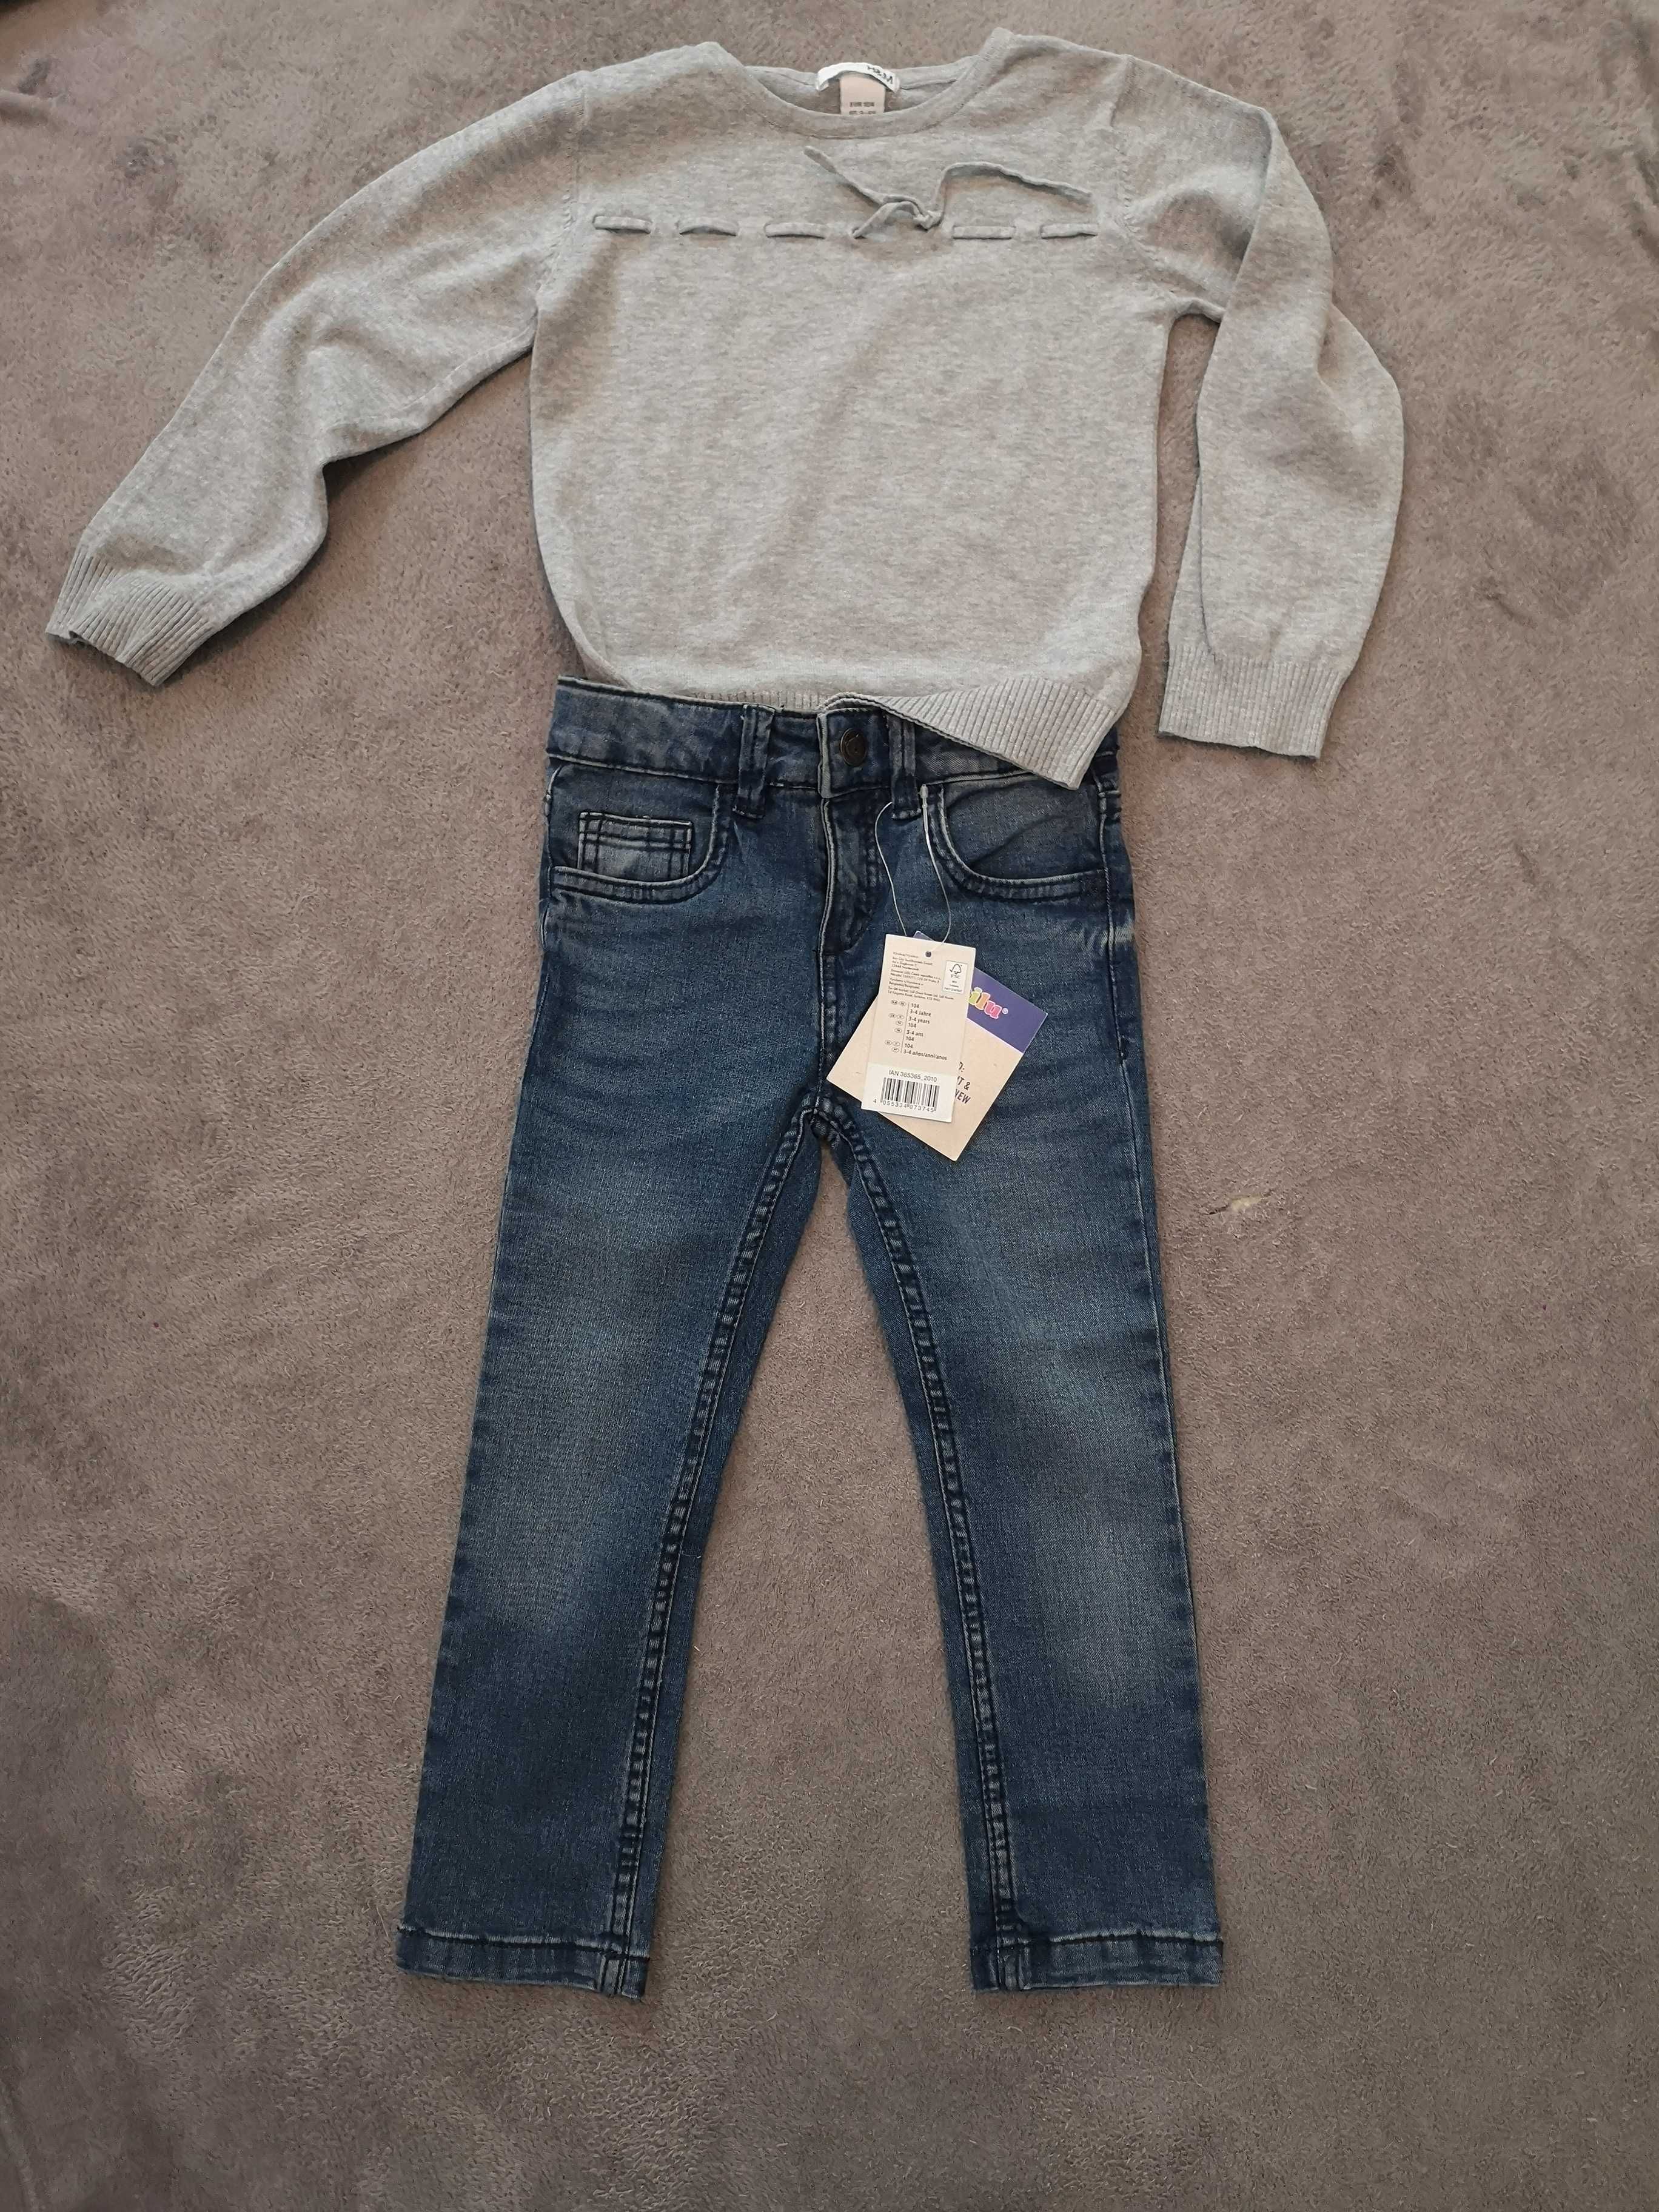 Sweter h&m r. 104, jeansy nowe lupilu 104